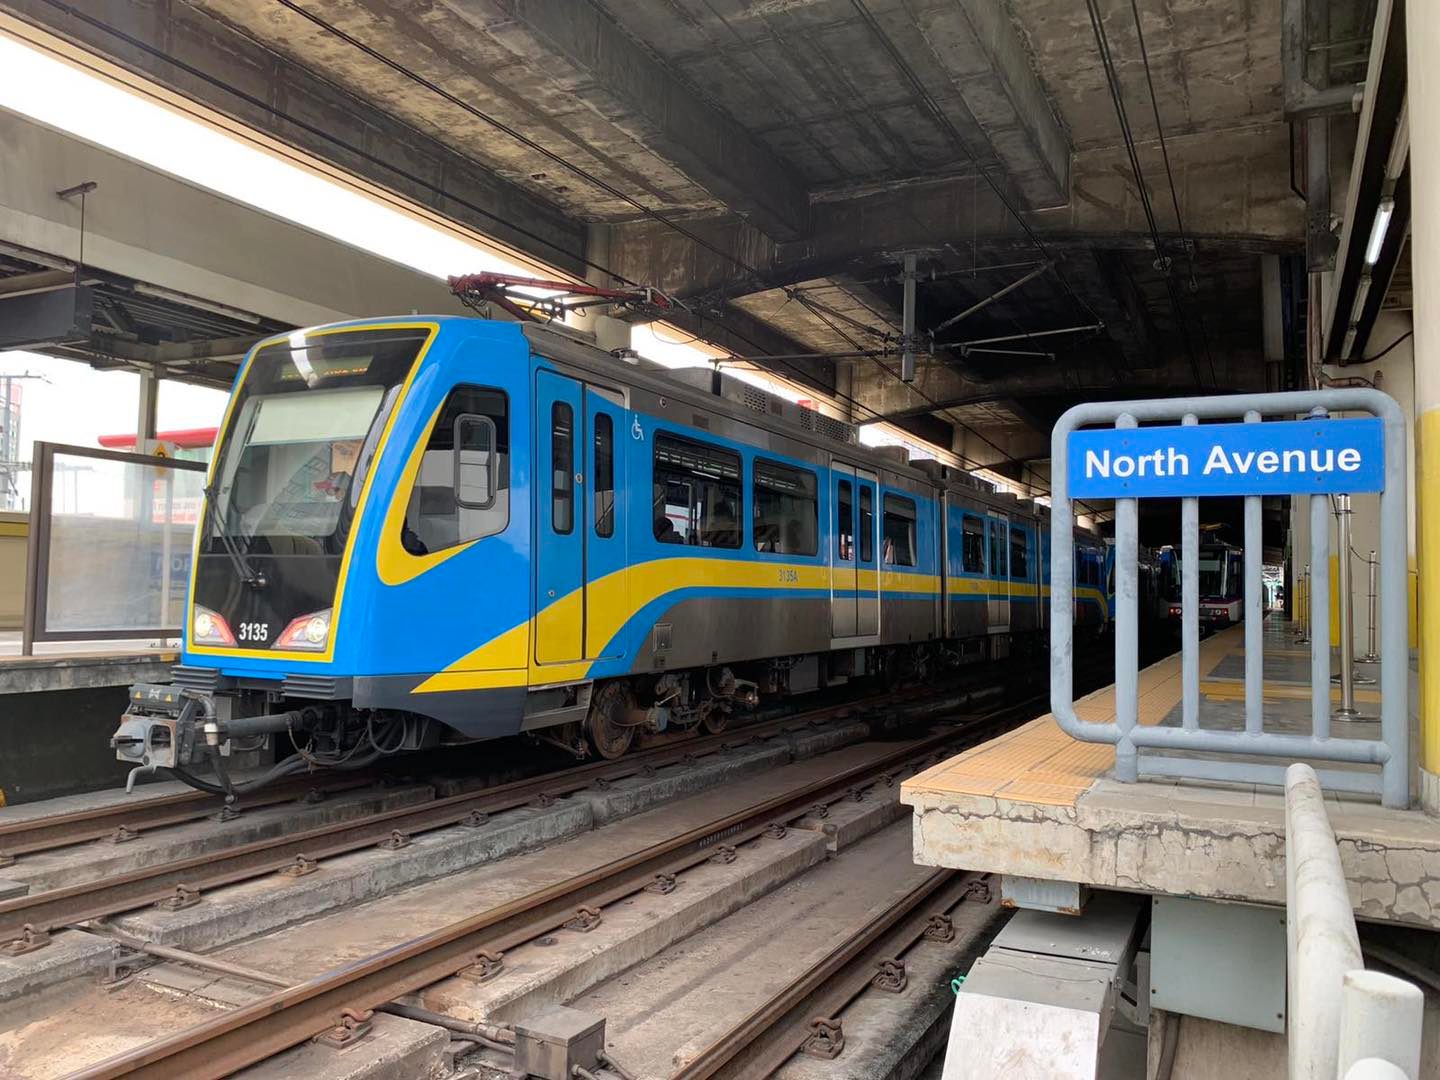 The photo shows new train coaches of the MRT-3 which vowed to improve its services after newly-installed Transportation Secretary Jaime Bautista identified areas for improvement